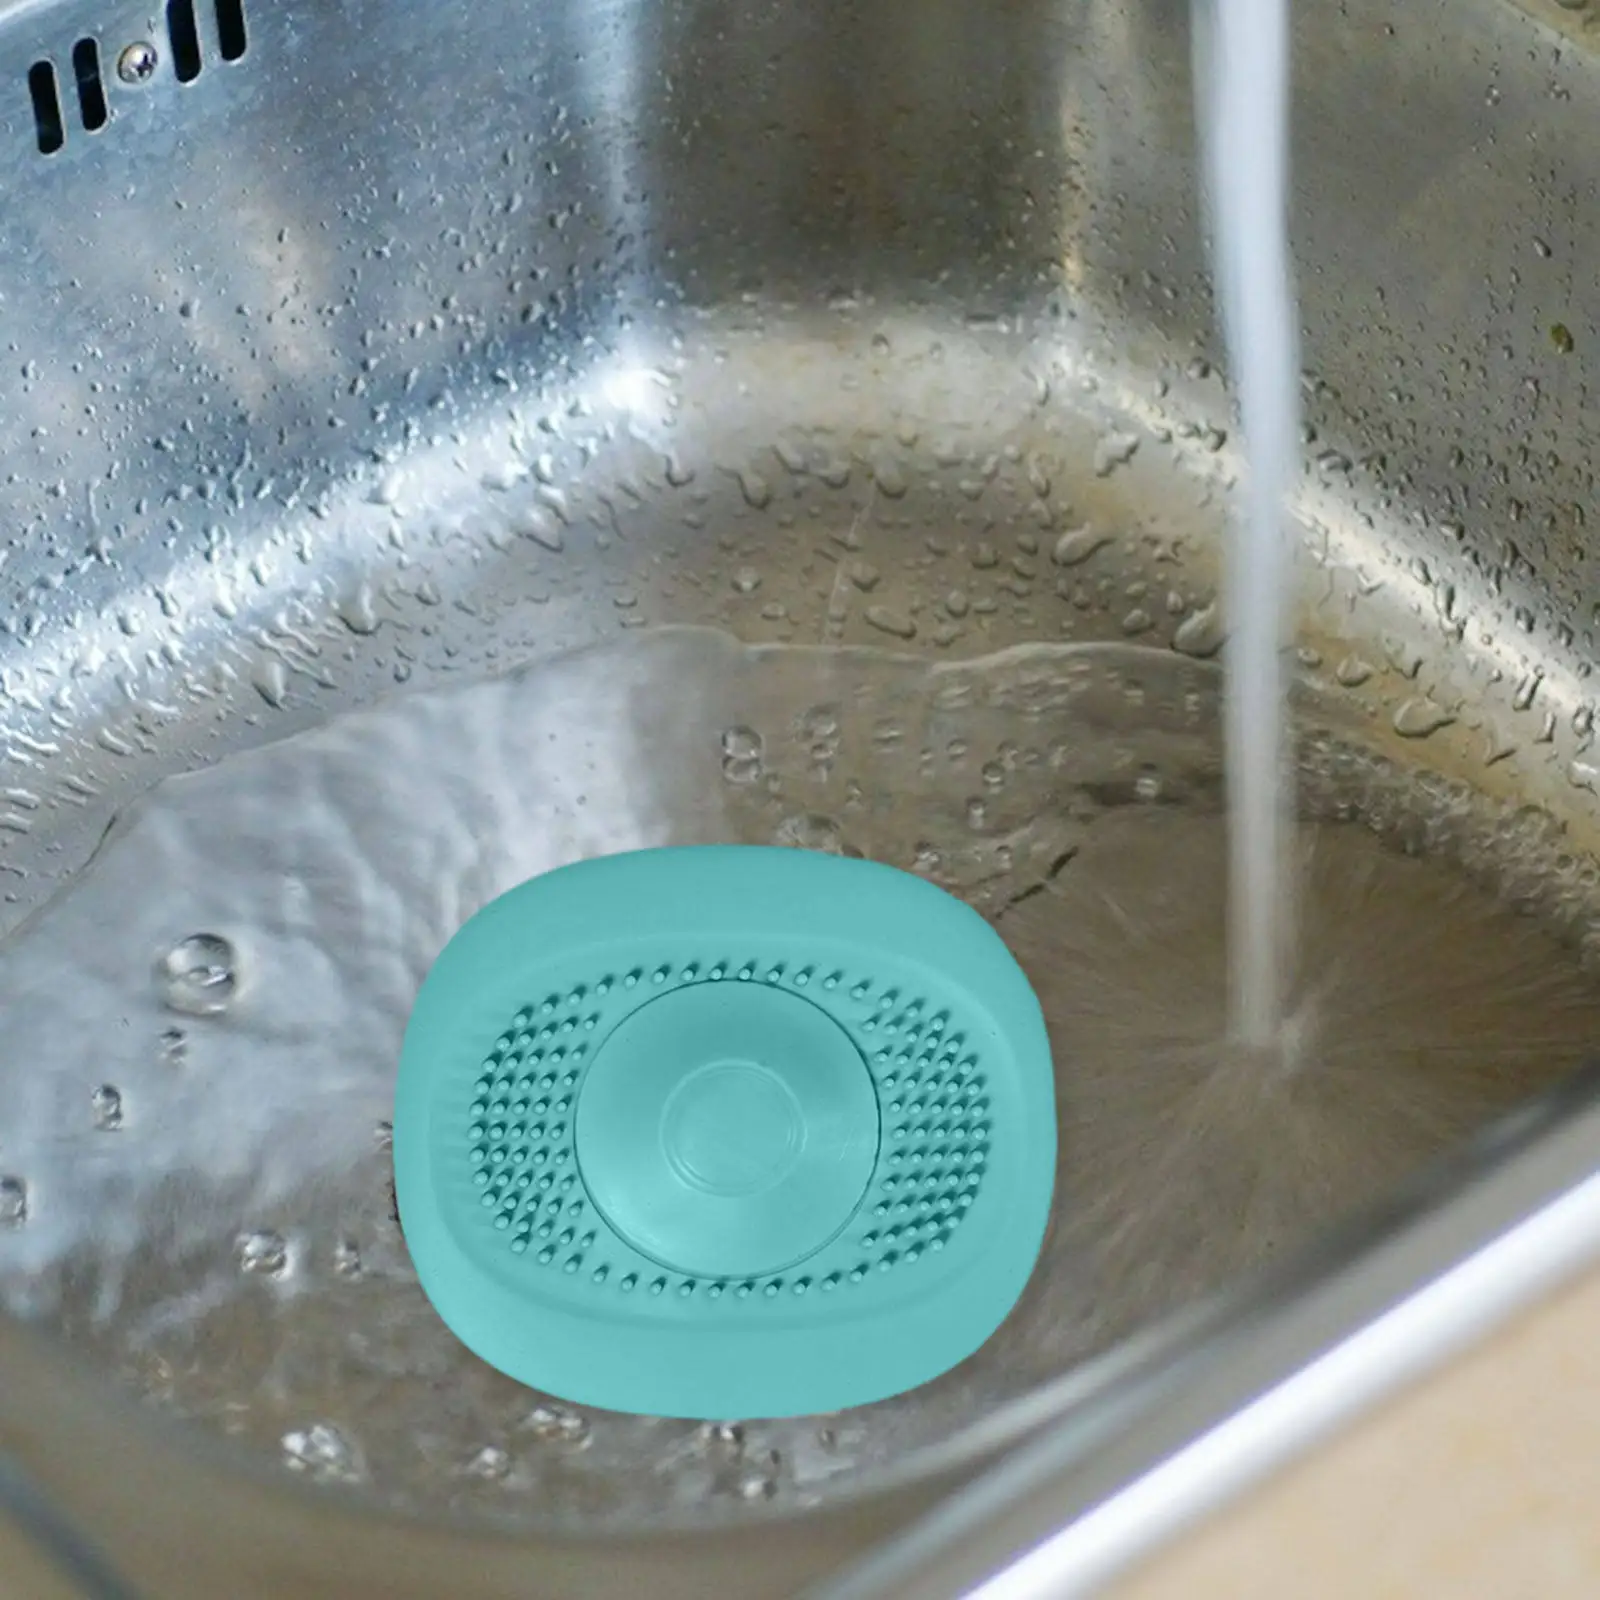 Tpr Silicone Strainer Silicage Strong Adsorption Wide Application Preventing Odor Sink Filter Shape for Washbasin